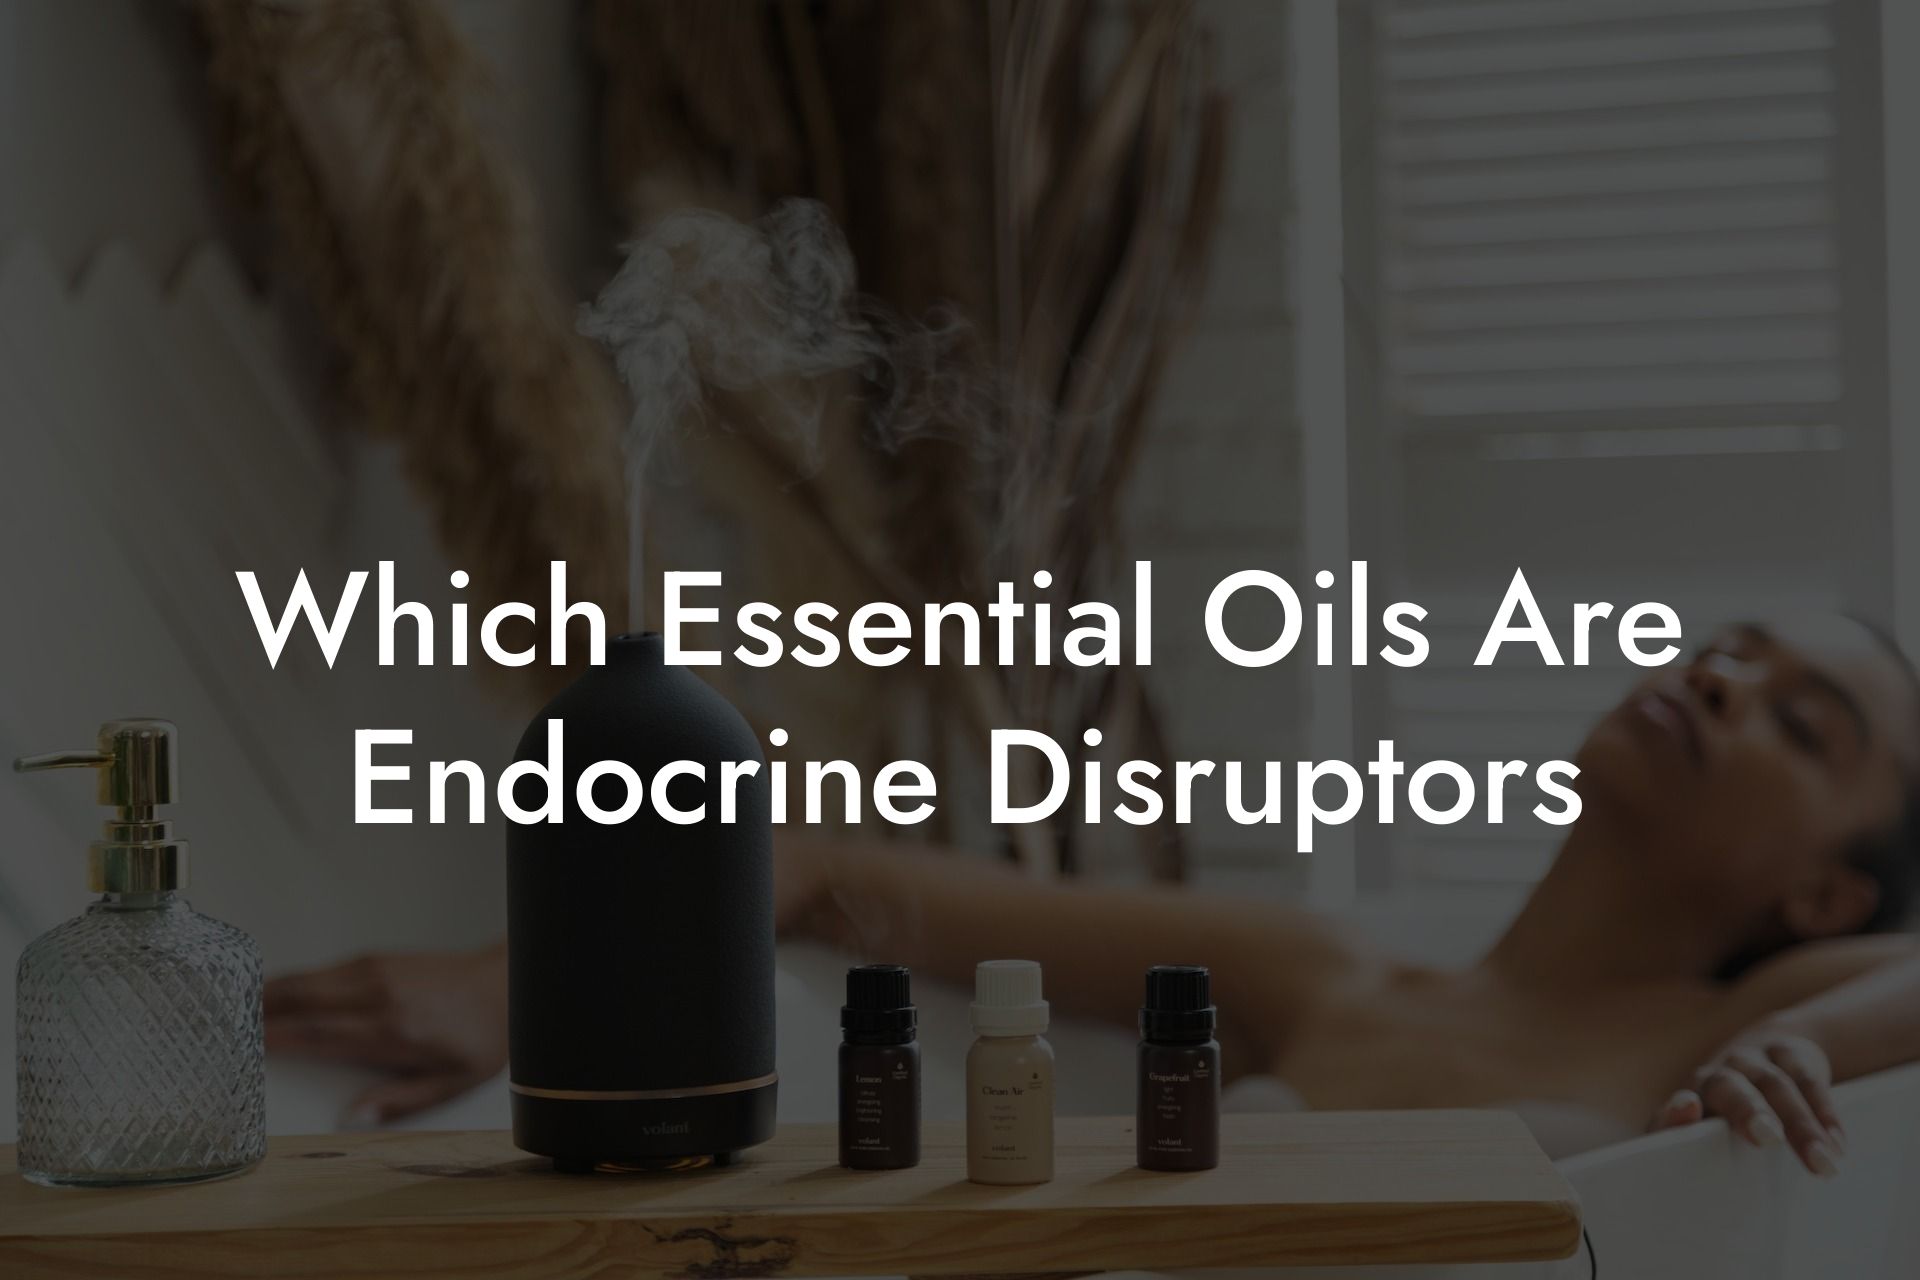 Which Essential Oils Are Endocrine Disruptors